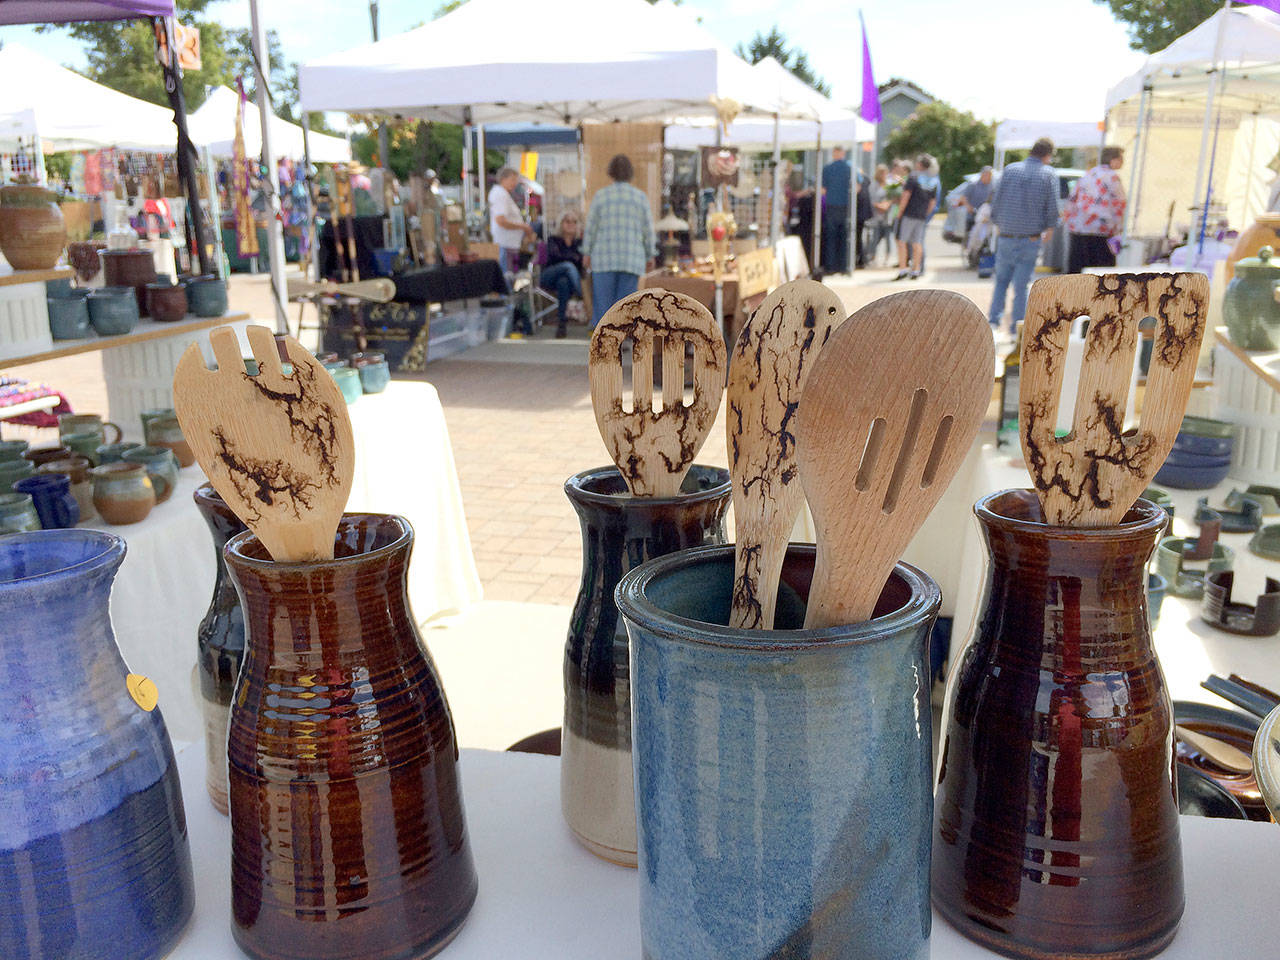 Art of Pottery displays wares at the Sequim Farmers Market. Photo courtesy of April Hammerand/Sequim Farmers Market